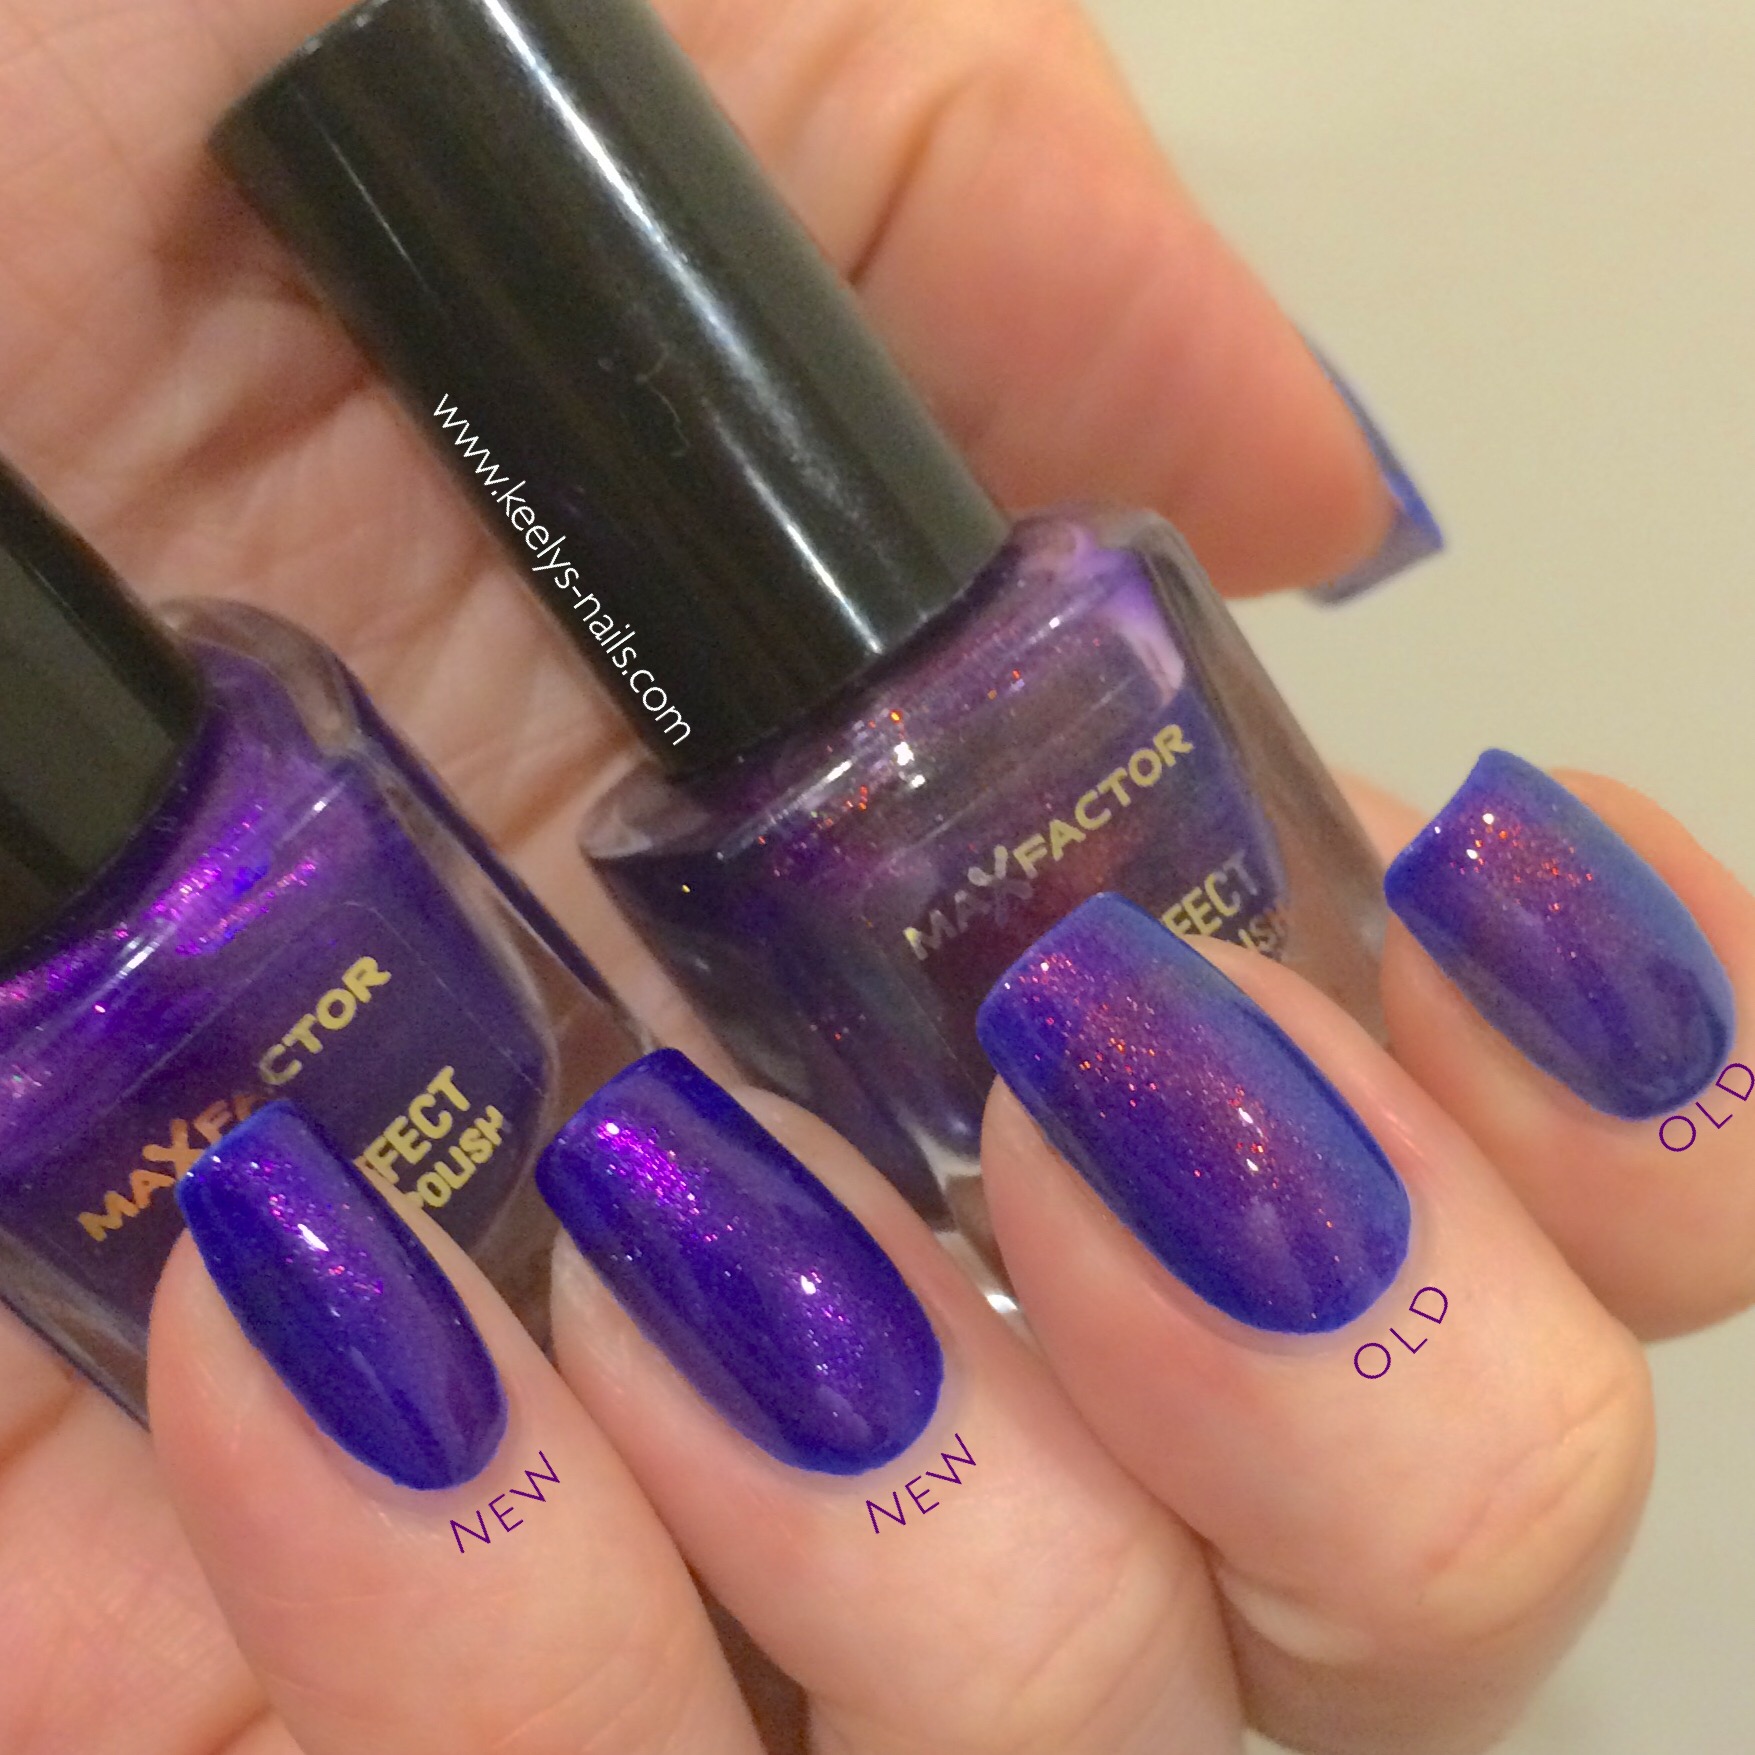 Max Factor Fantasy Fire New Version vs old | Keely's Nails